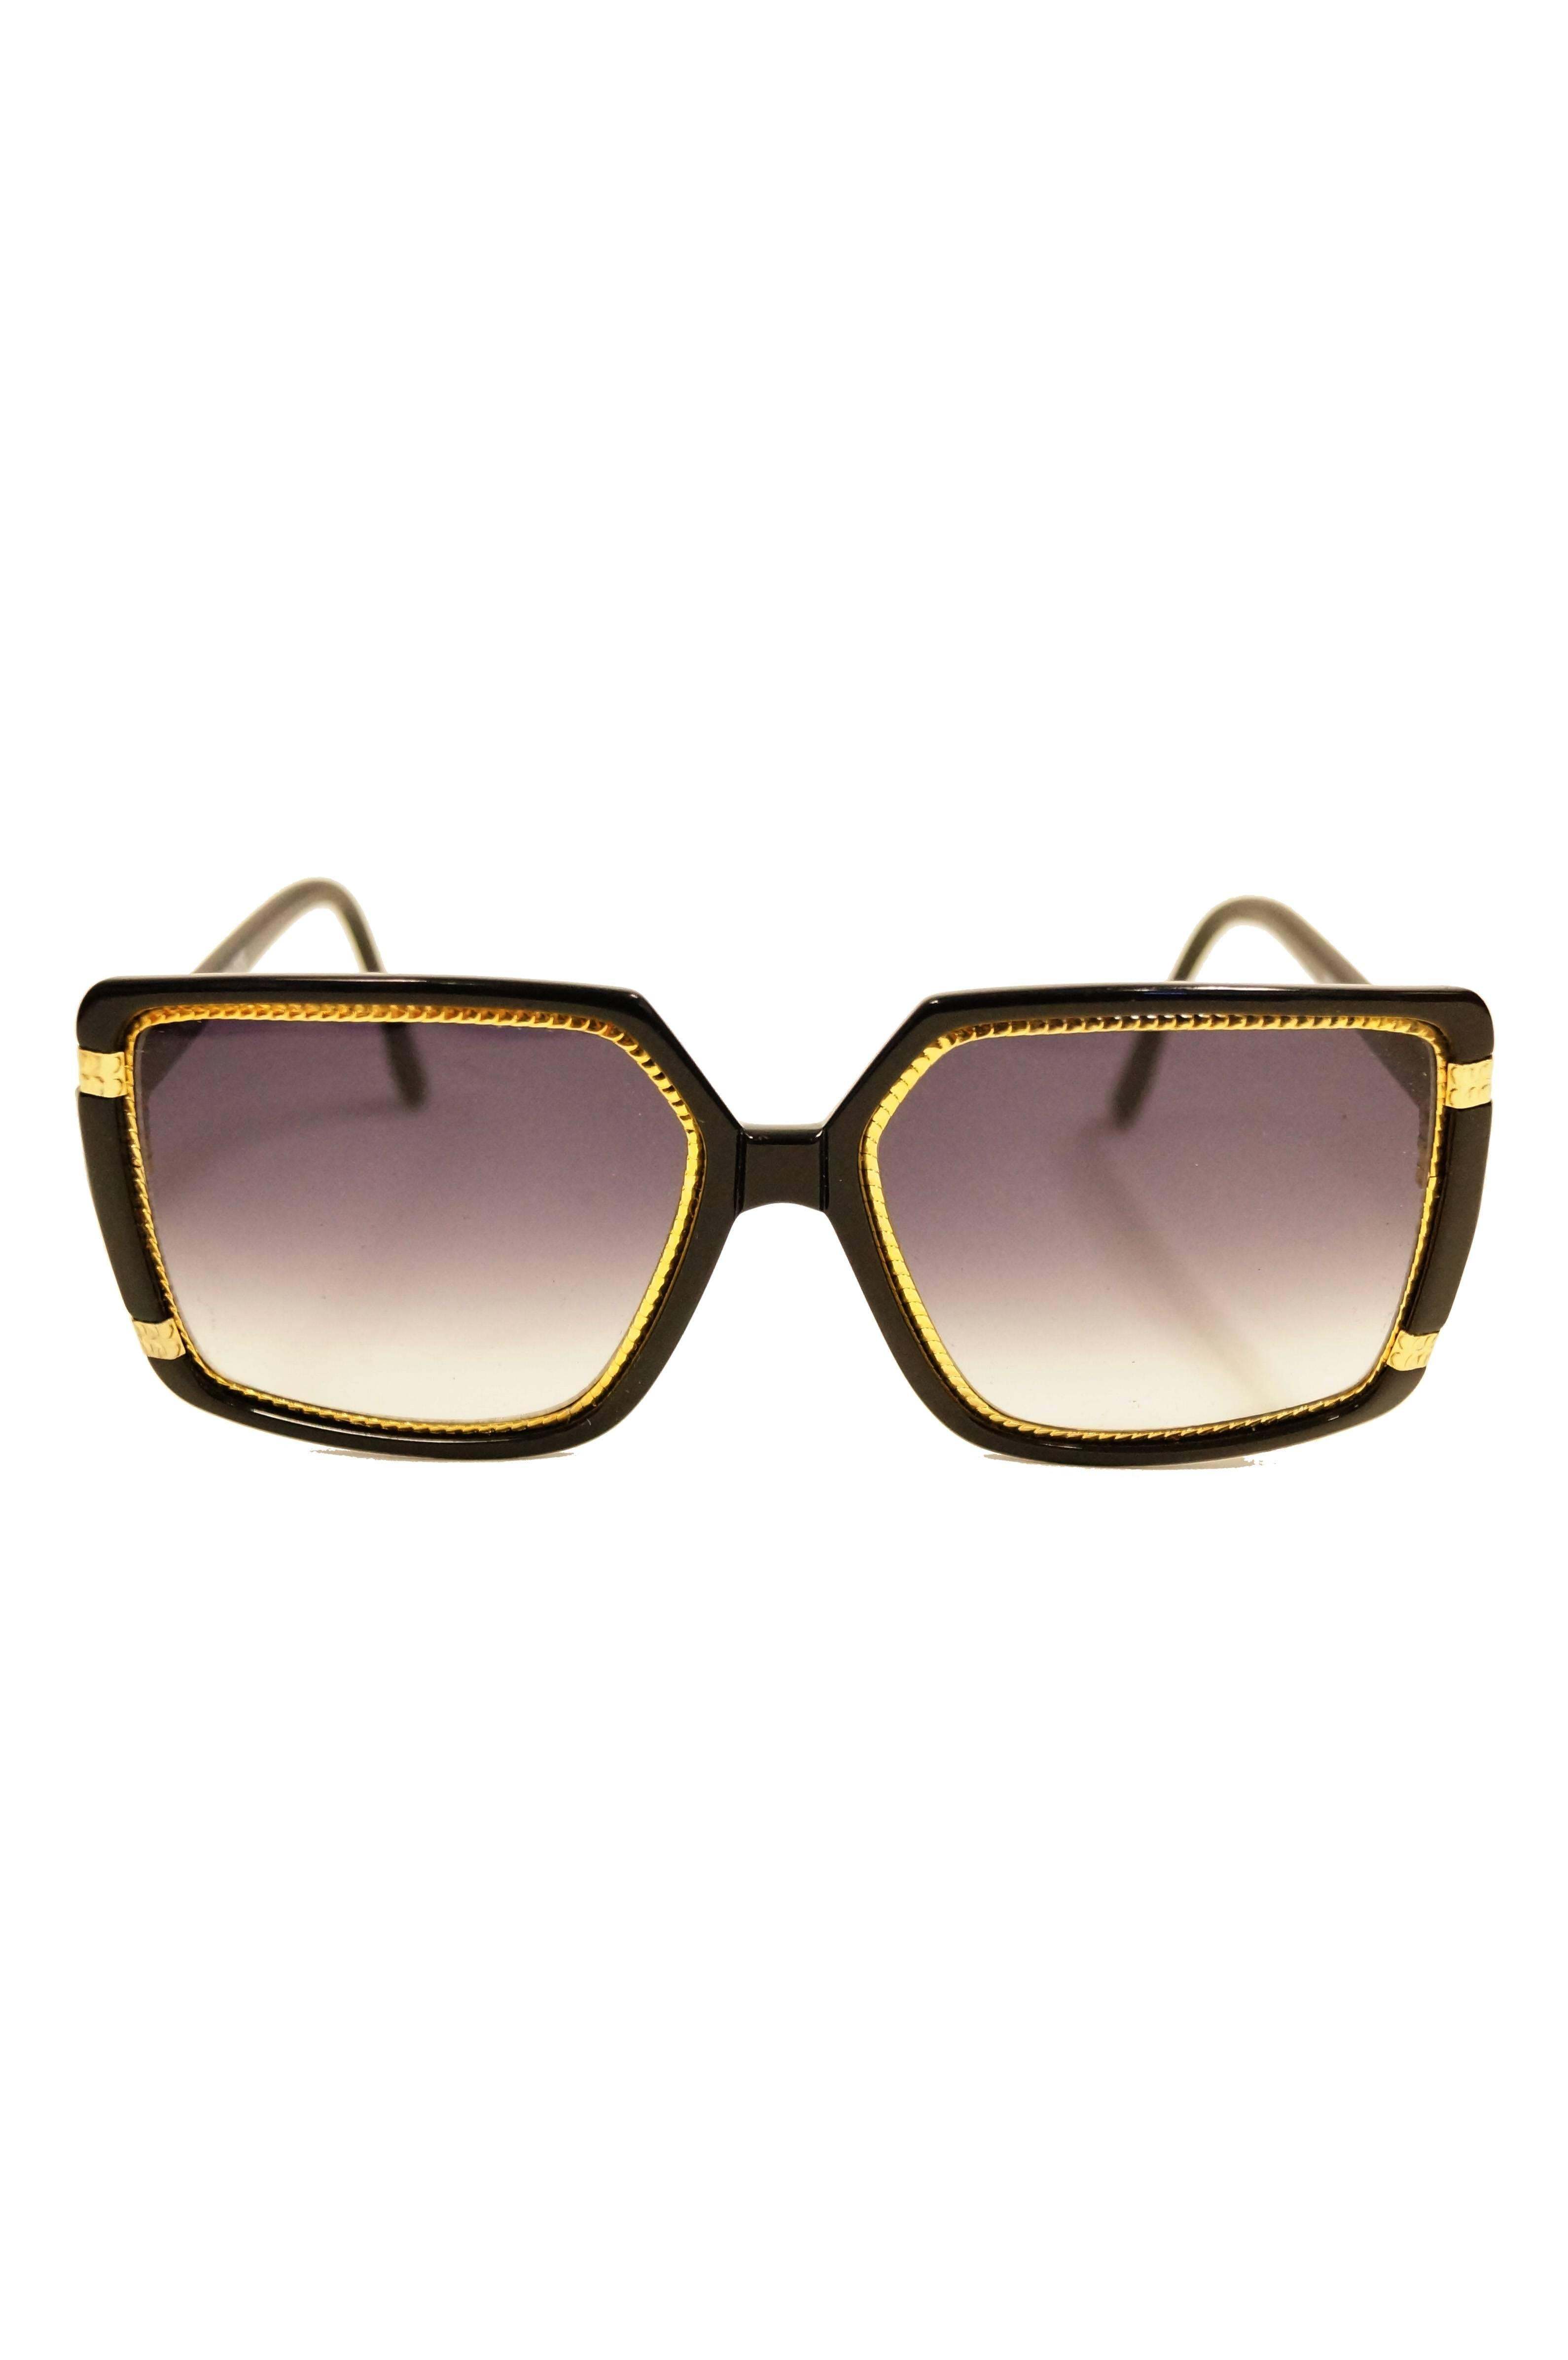 Striking Ted Lapidus black and gold sunglasses. Sunglasses feature a primarily black frame with bold gold braid - like details. Smoky purple to clear gradient on lenses. 

Lens Width- 63.5mm
Bridge Width- 6.35mm
Temple (arm) Length - 127mm

